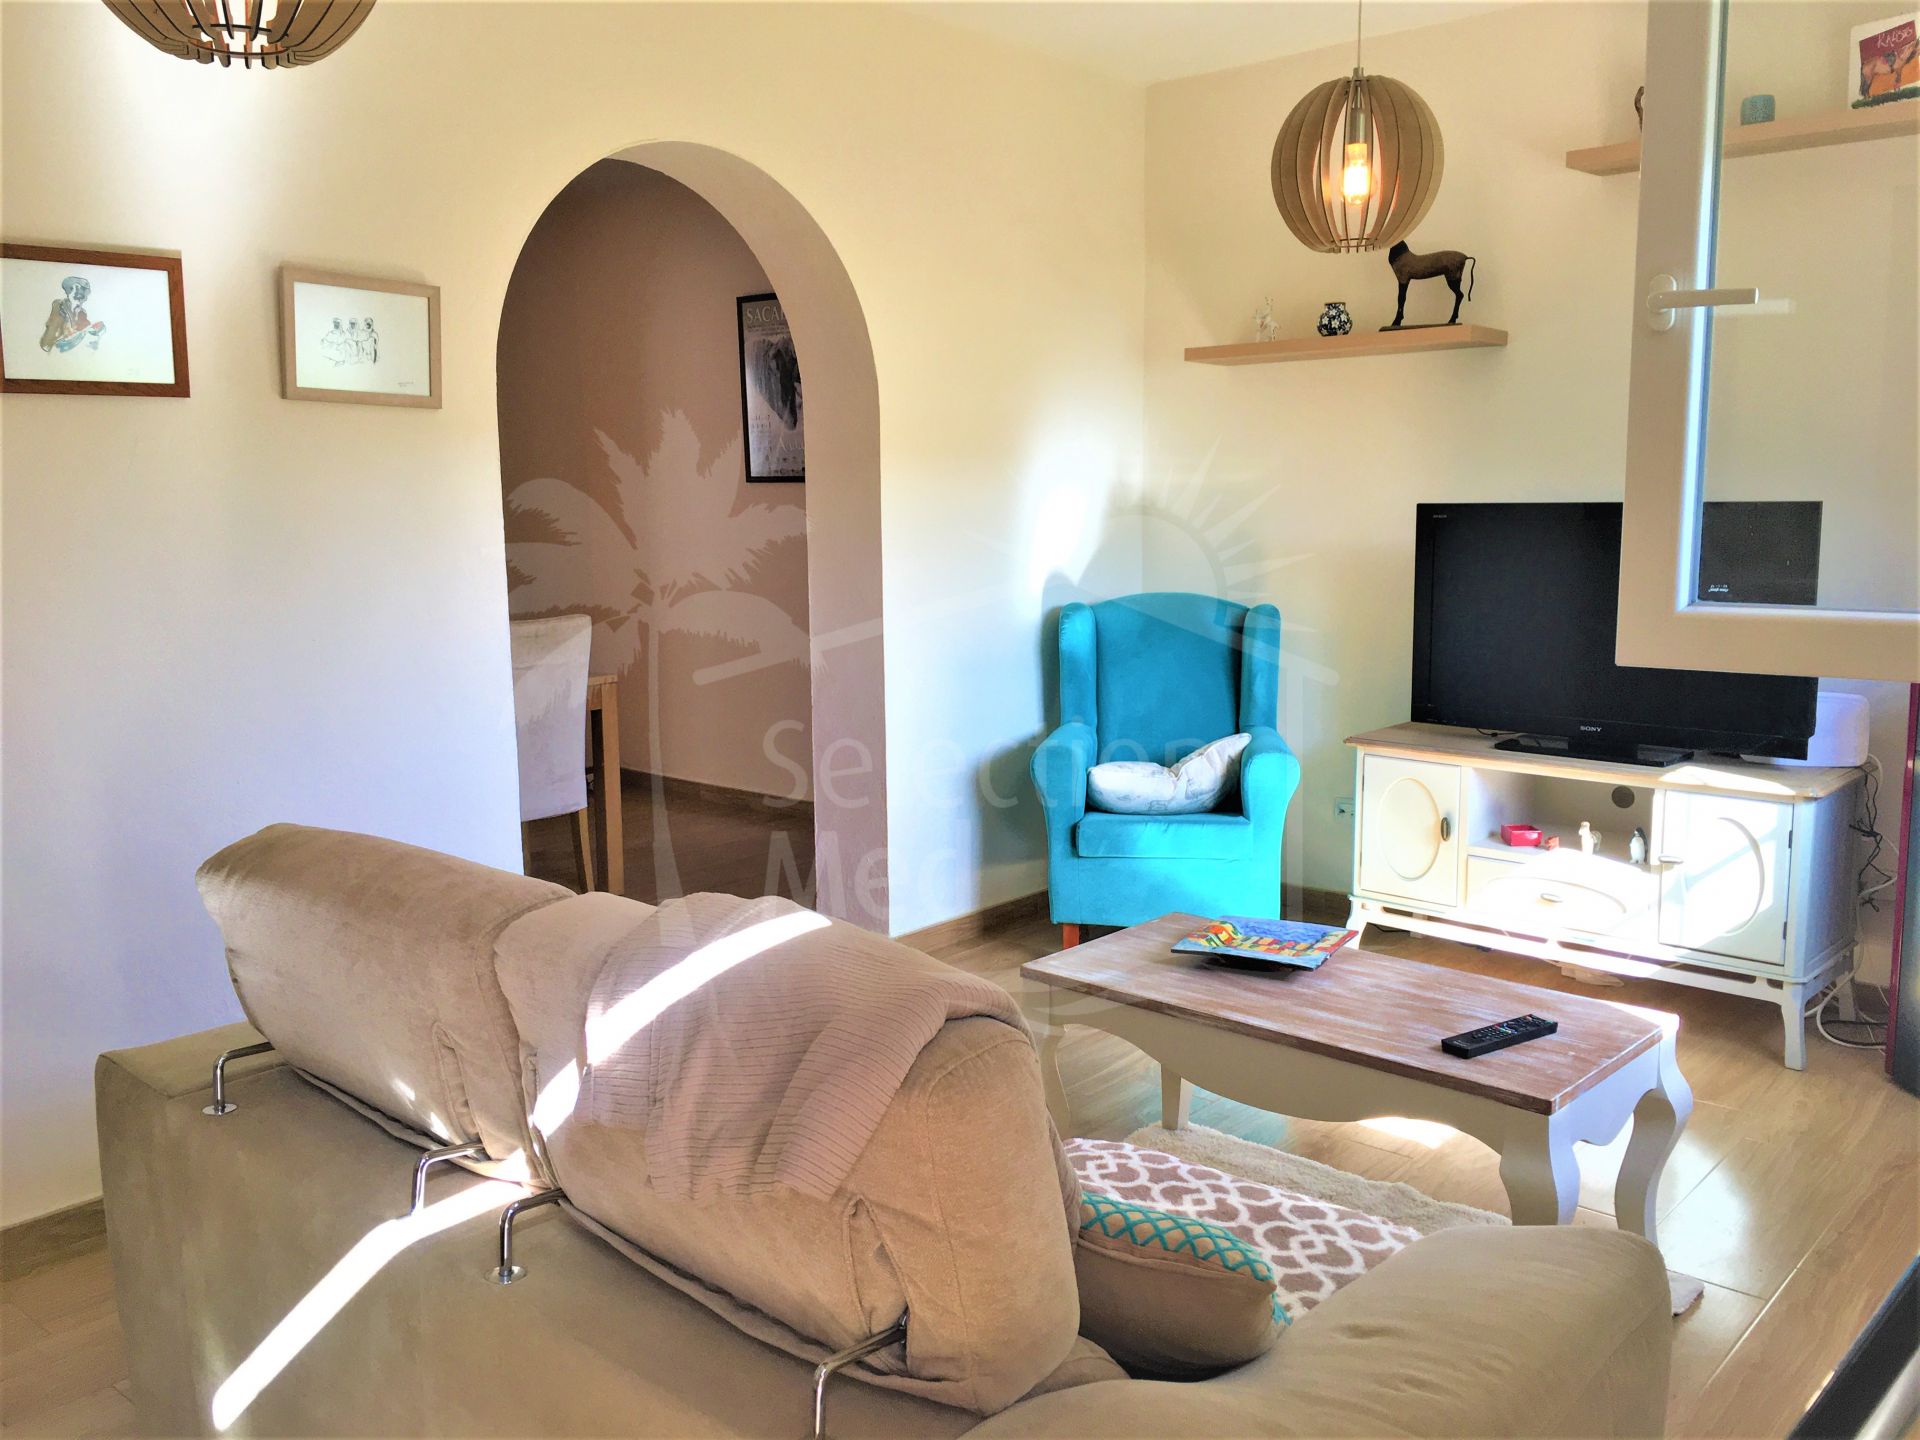 Wonderful Rental Investment Opportunity - Immaculate 3 Bedroom Village House close to Sotogrande.